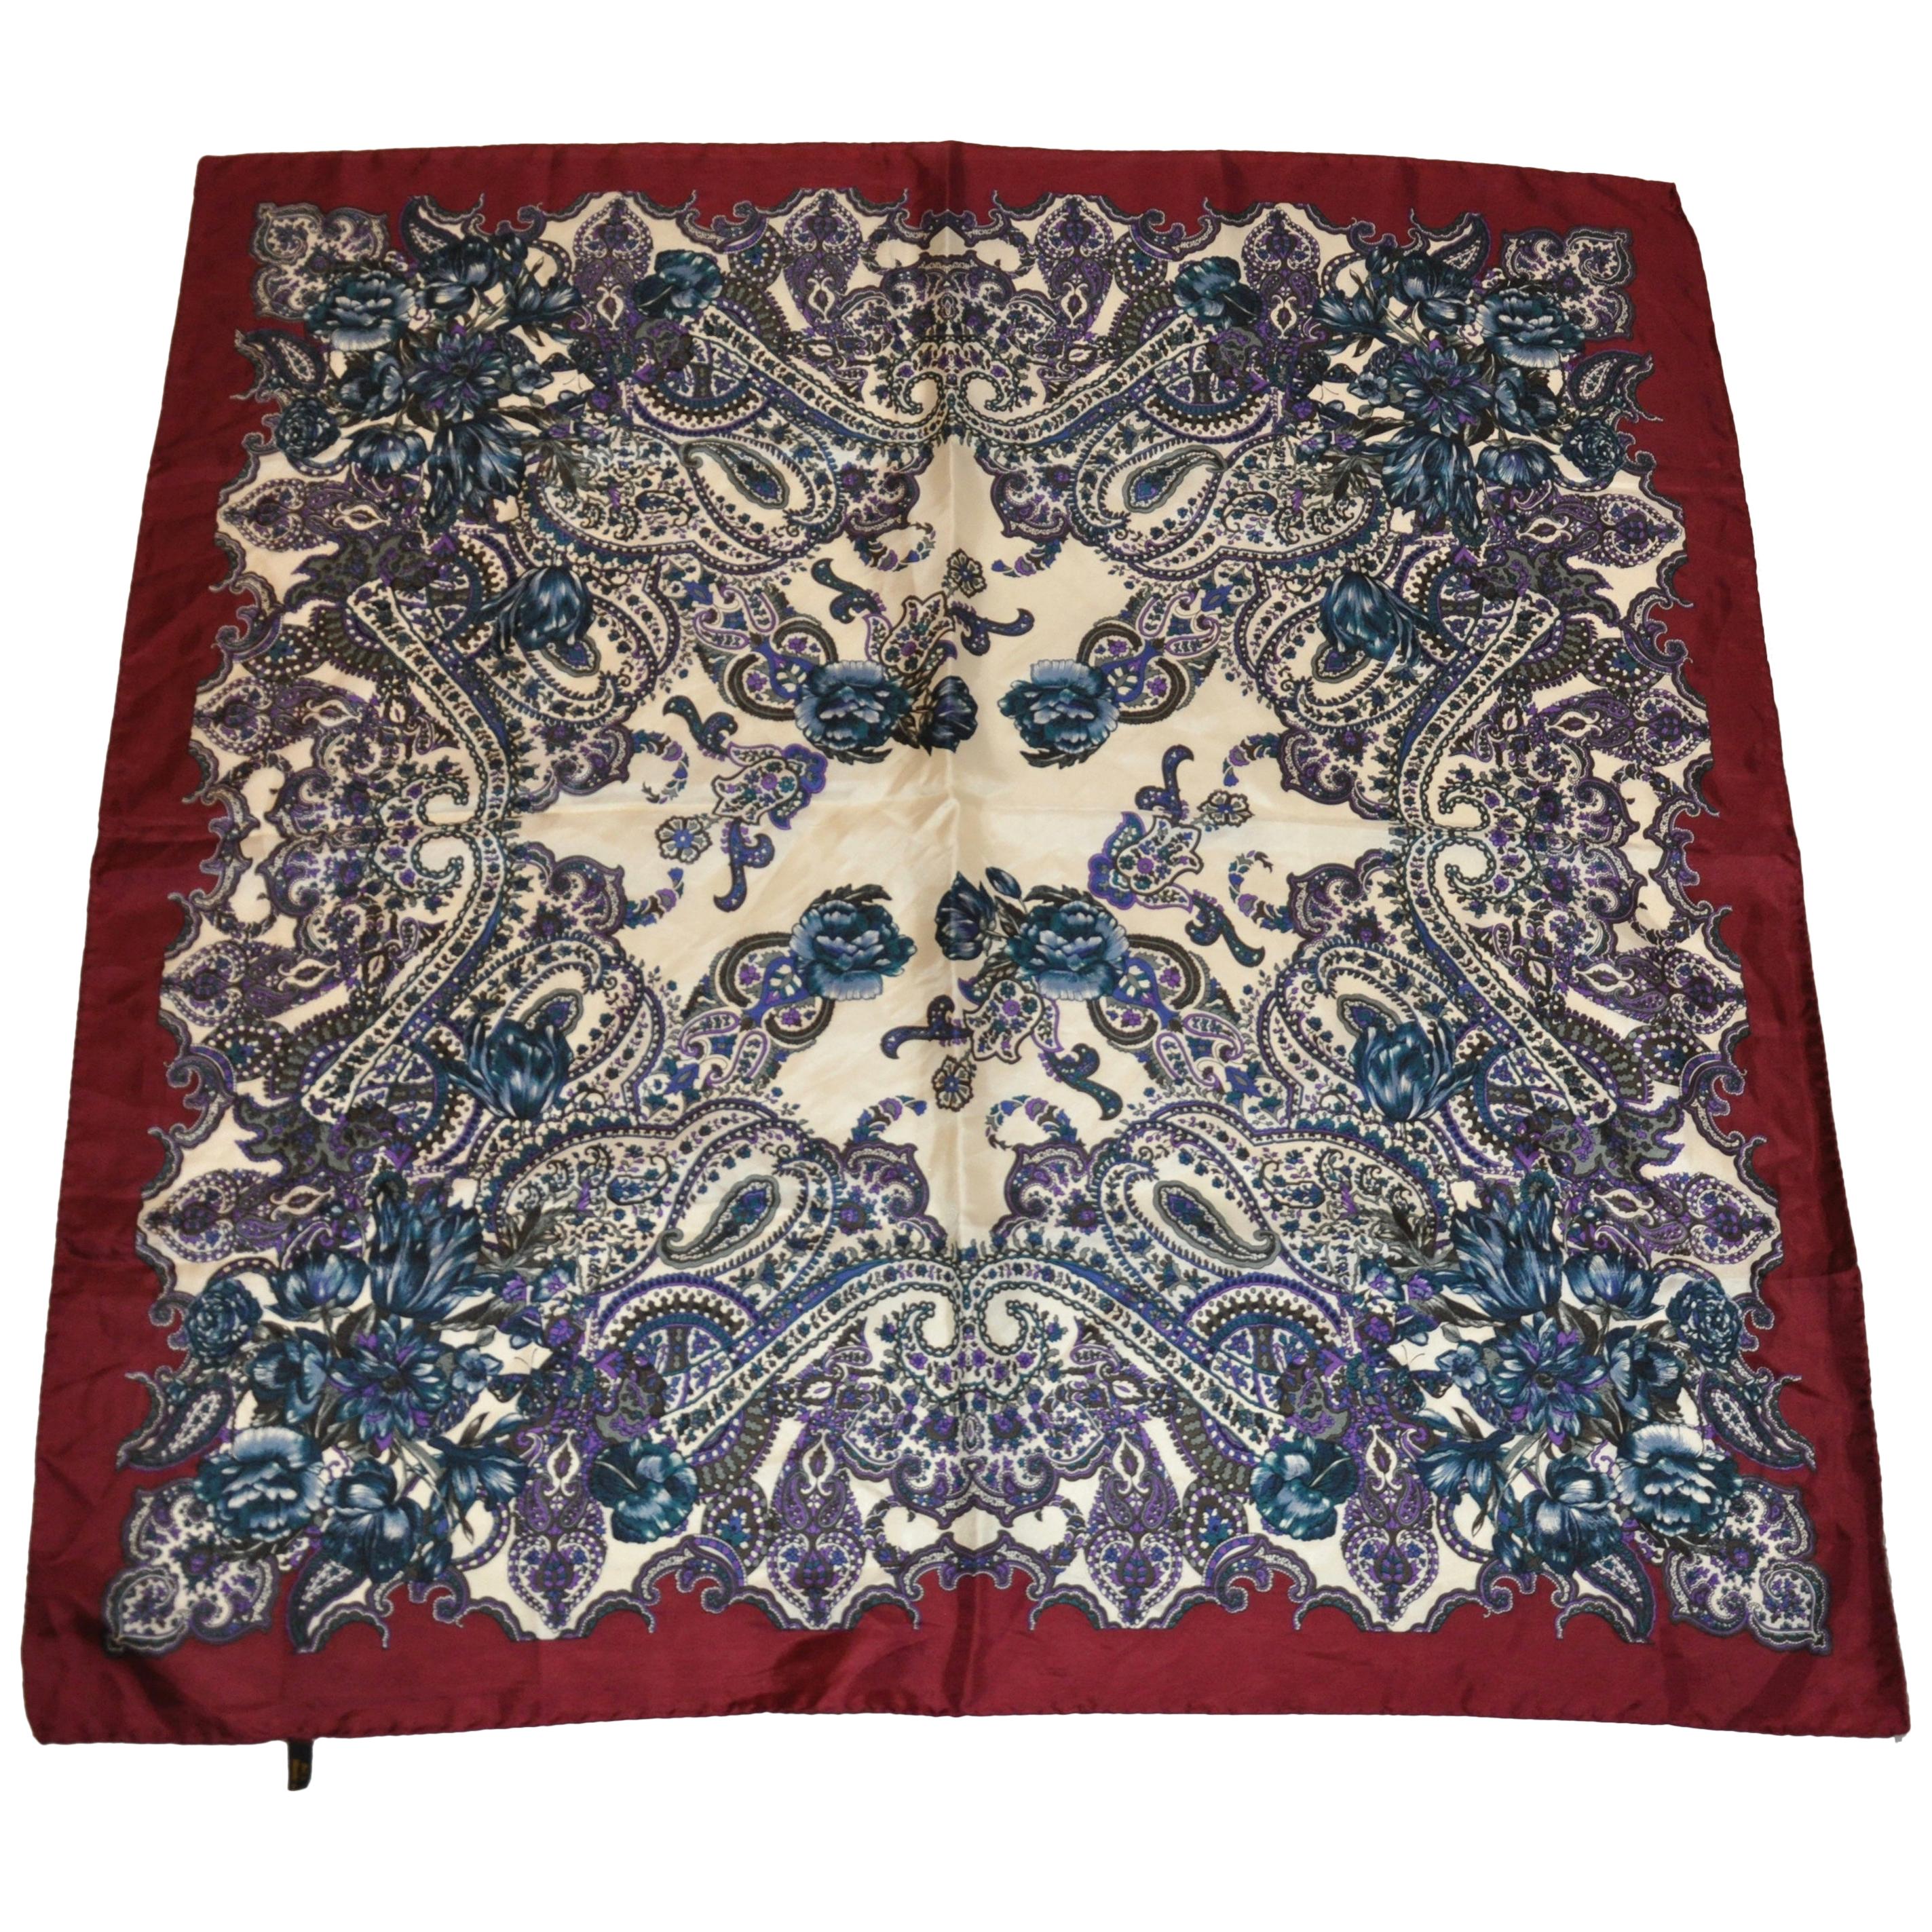 Rich Burgundy "Floral Entwined With Palseys" Silk Scarf